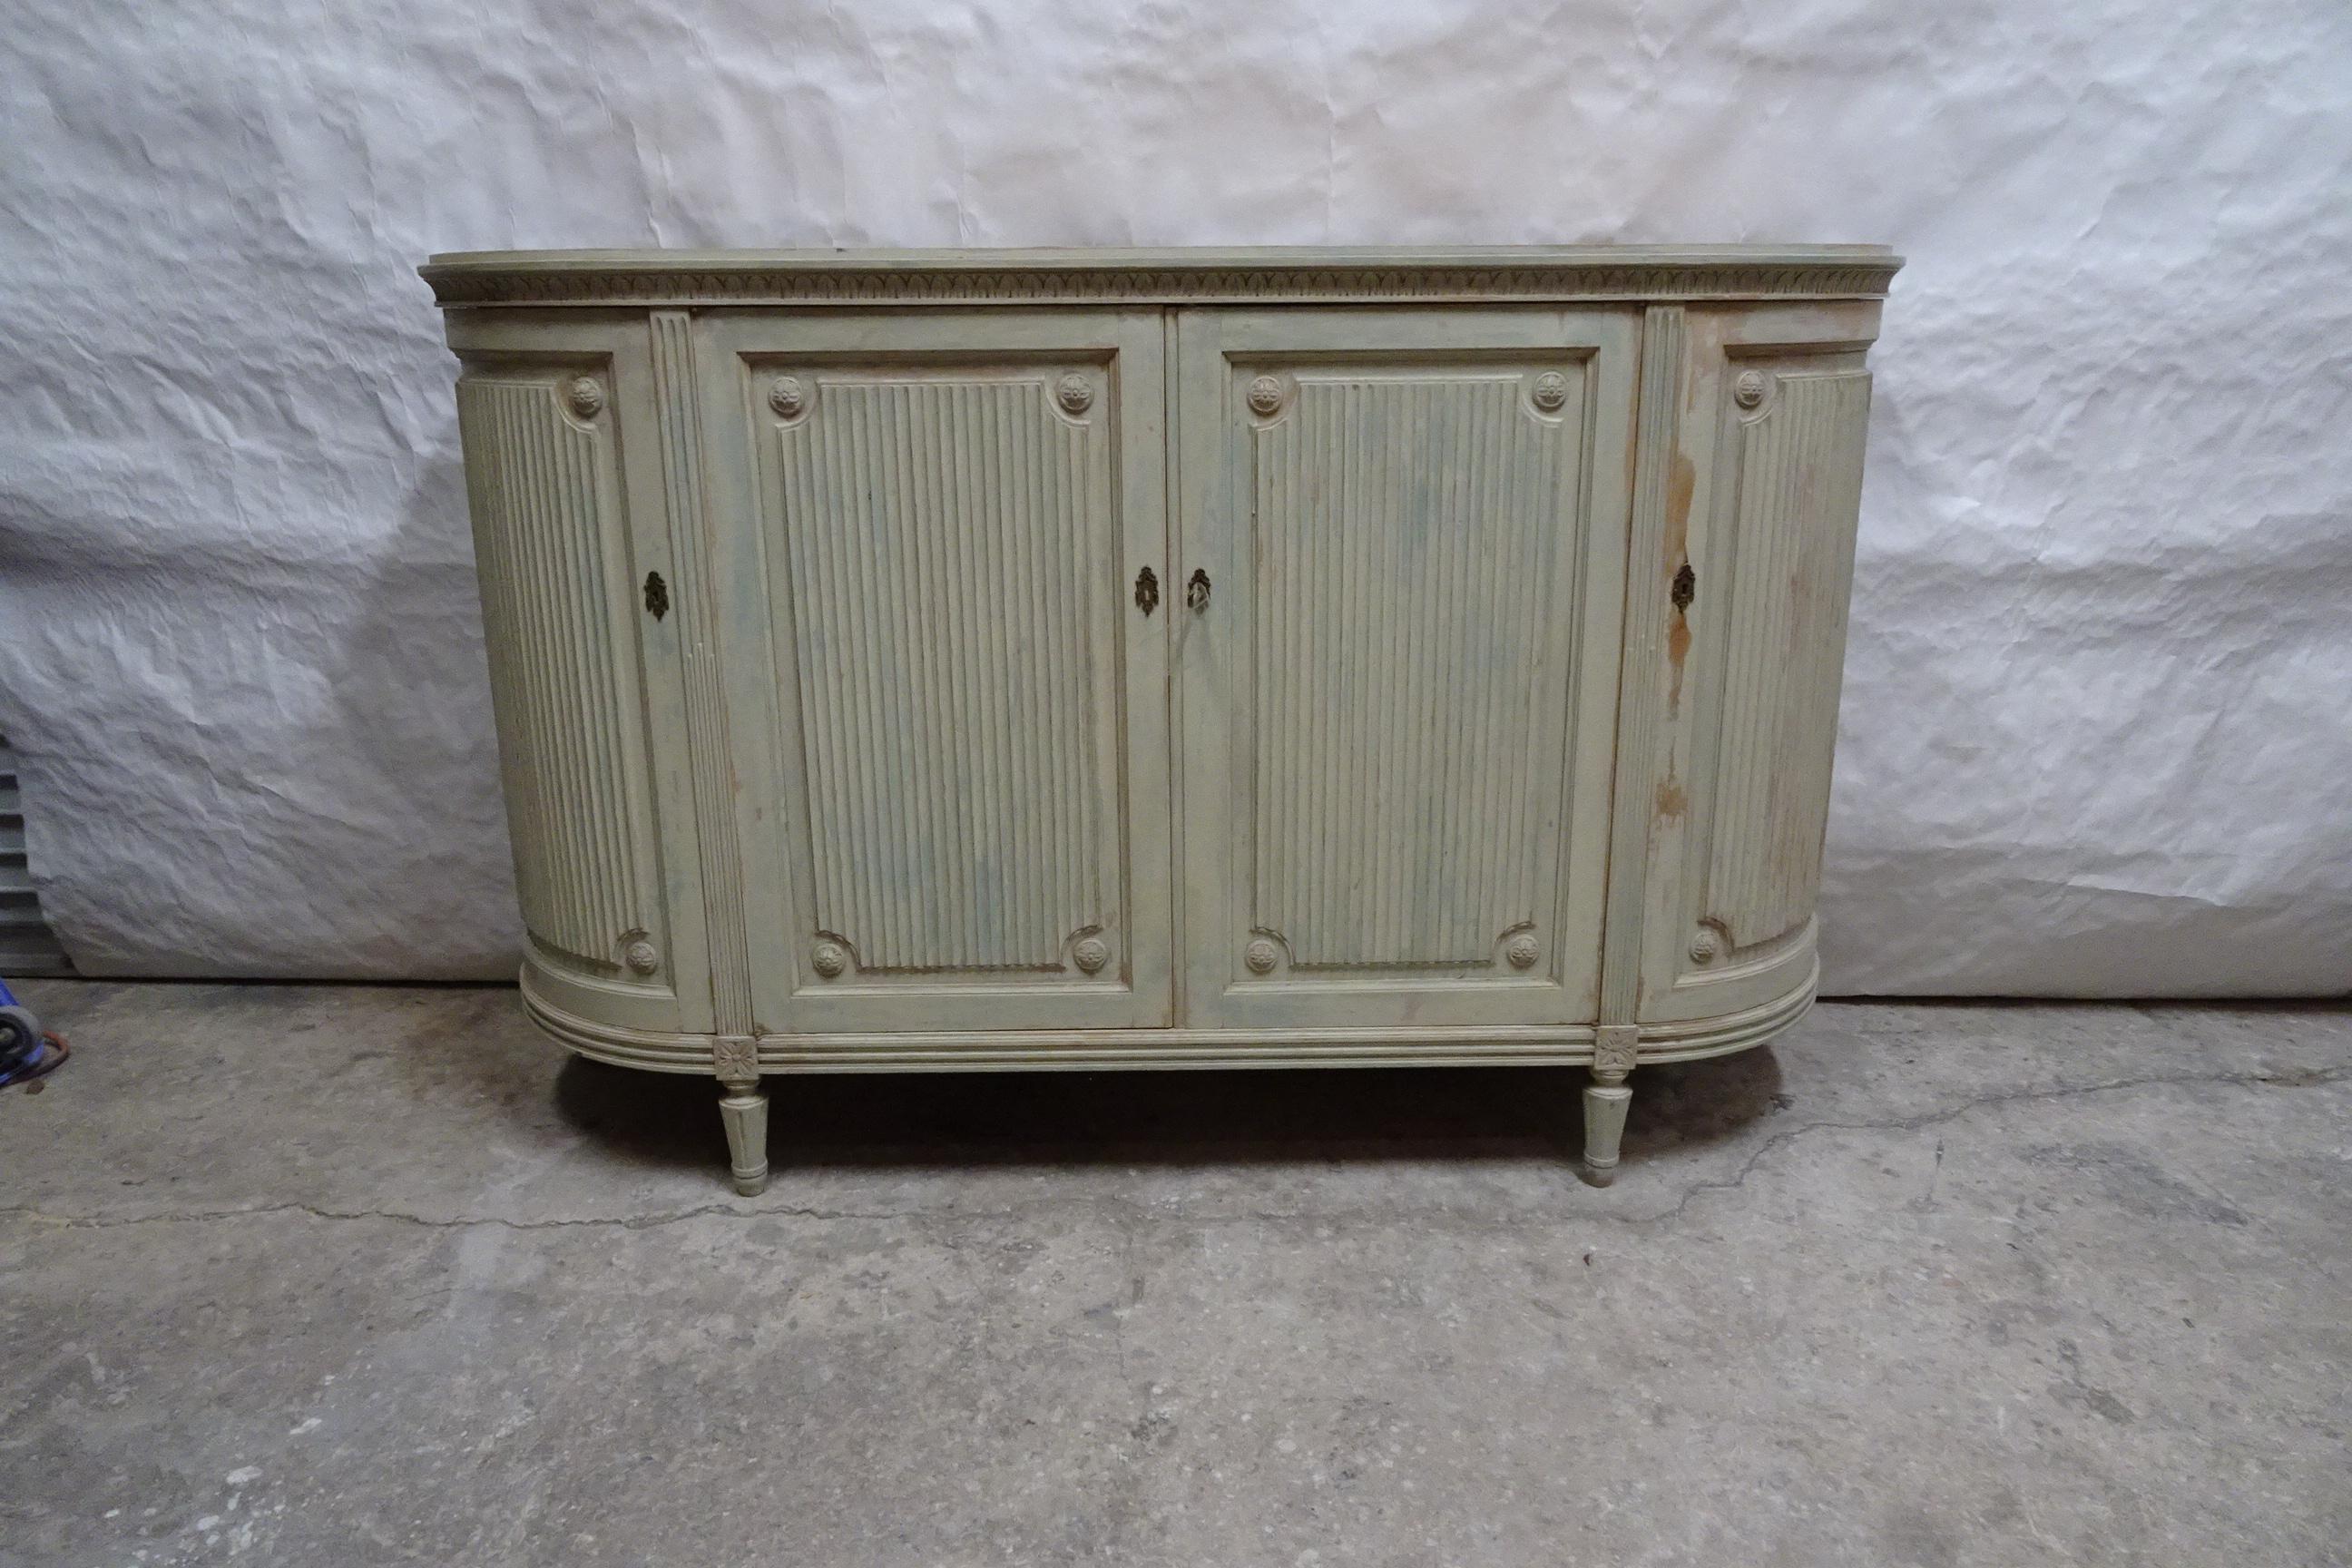 This is a unique Swedish Gustavian Original Painted Sideboard with Original Key.